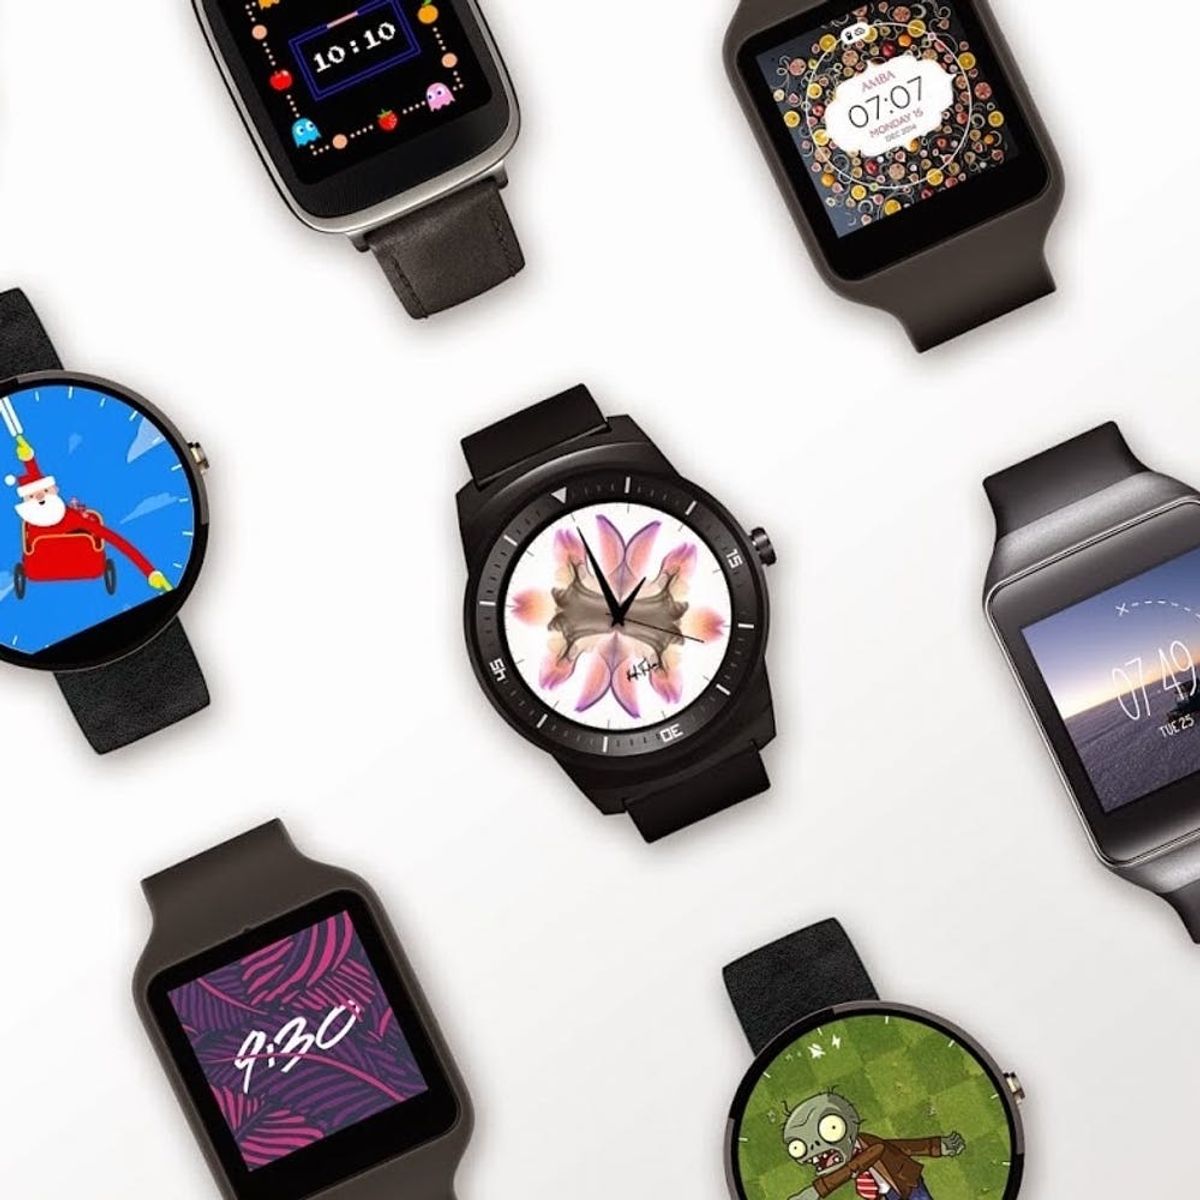 How to Make Your Android Wear Super Beautiful